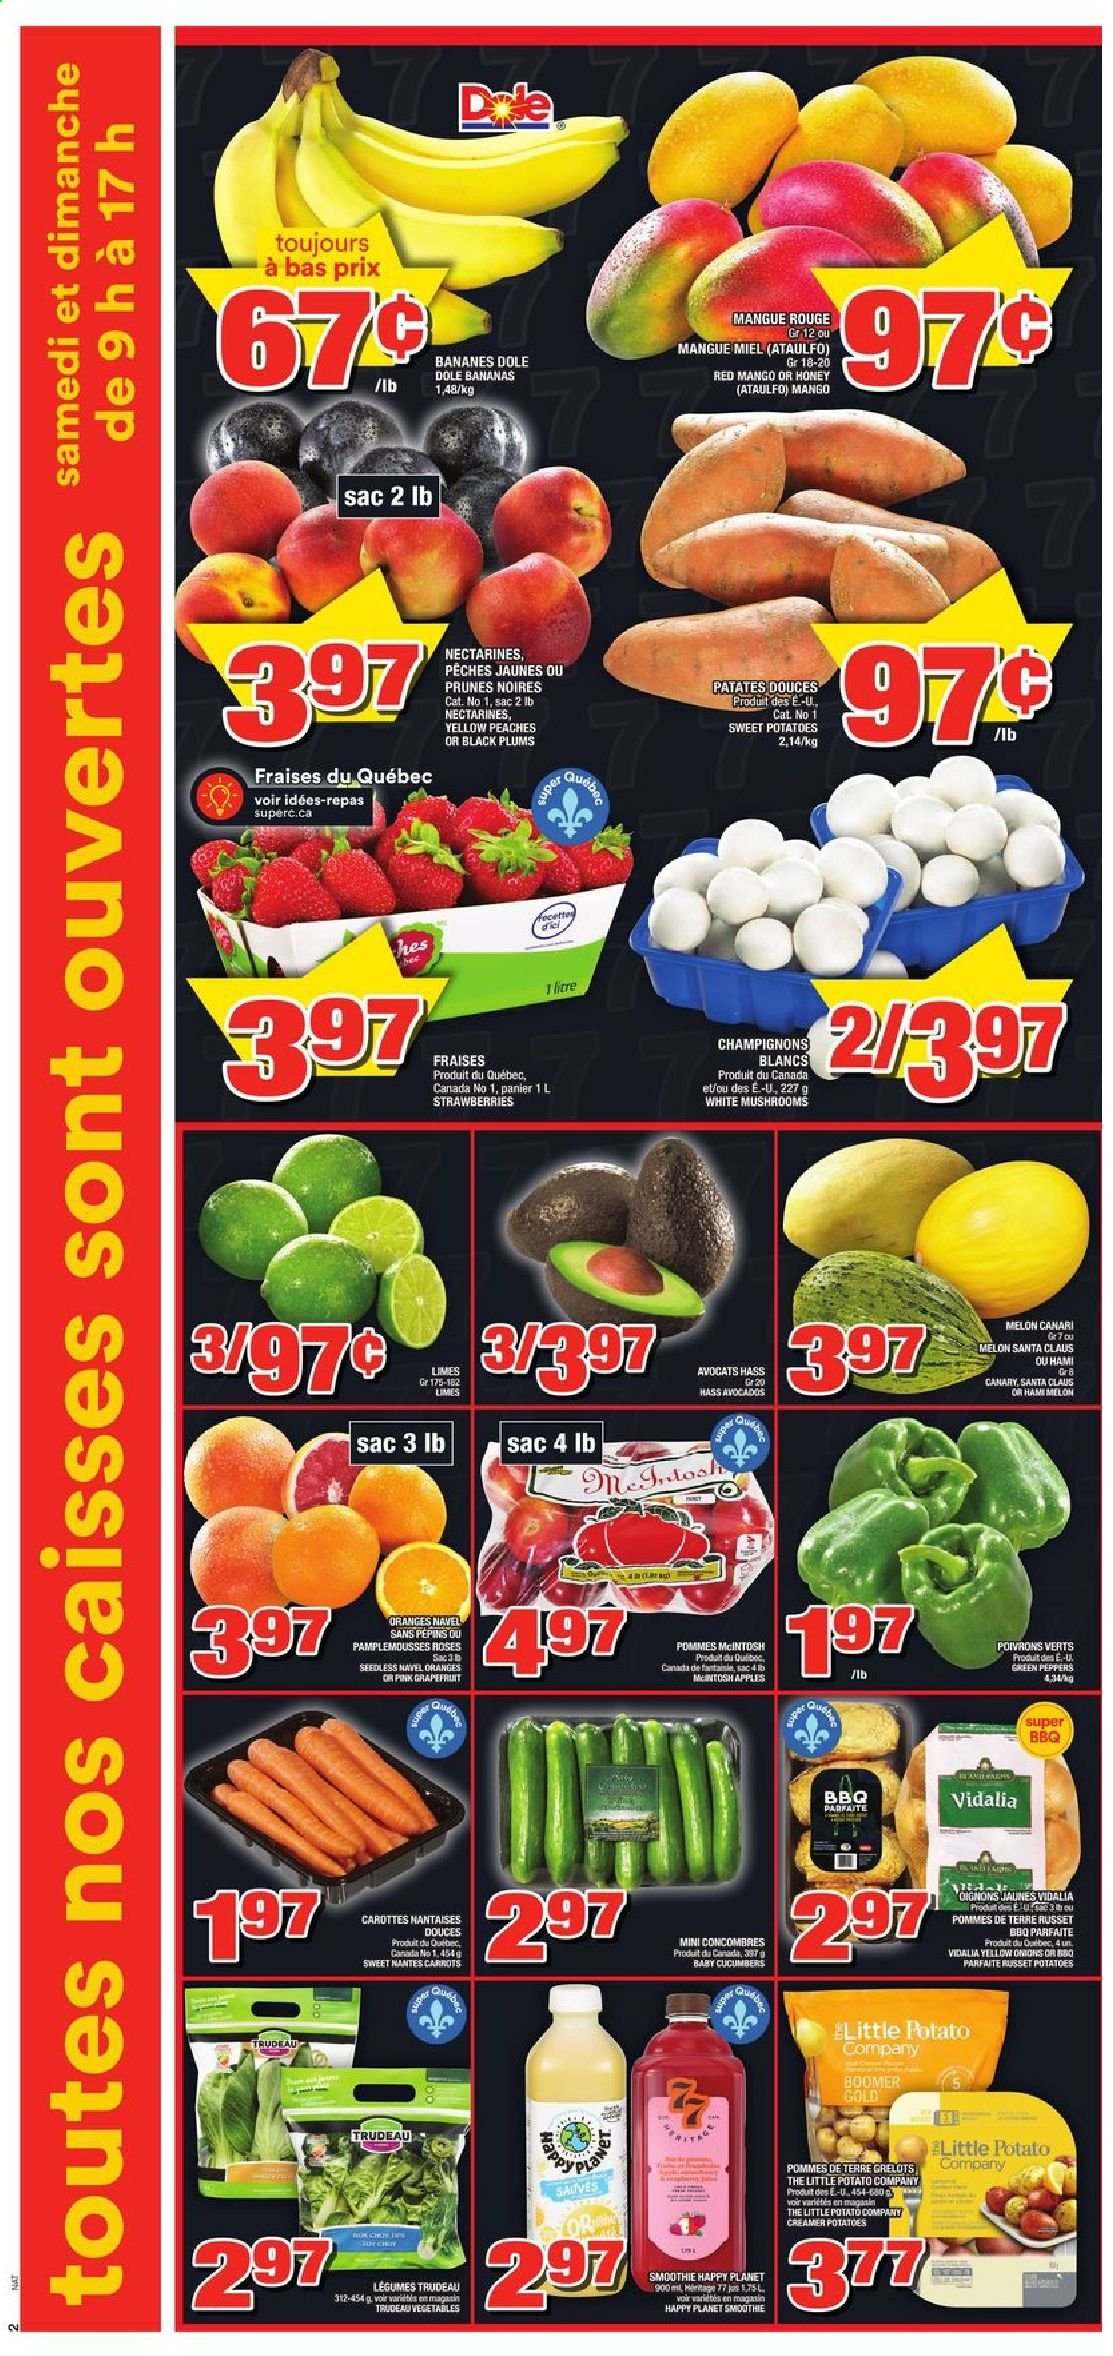 thumbnail - Super C Flyer - July 08, 2021 - July 14, 2021 - Sales products - mushrooms, carrots, cucumber, russet potatoes, sweet potato, potatoes, onion, Dole, peppers, bananas, mango, nectarines, strawberries, plums, melons, black plums, peaches, navel oranges, Santa, prunes, dried fruit, smoothie, L'Or. Page 3.